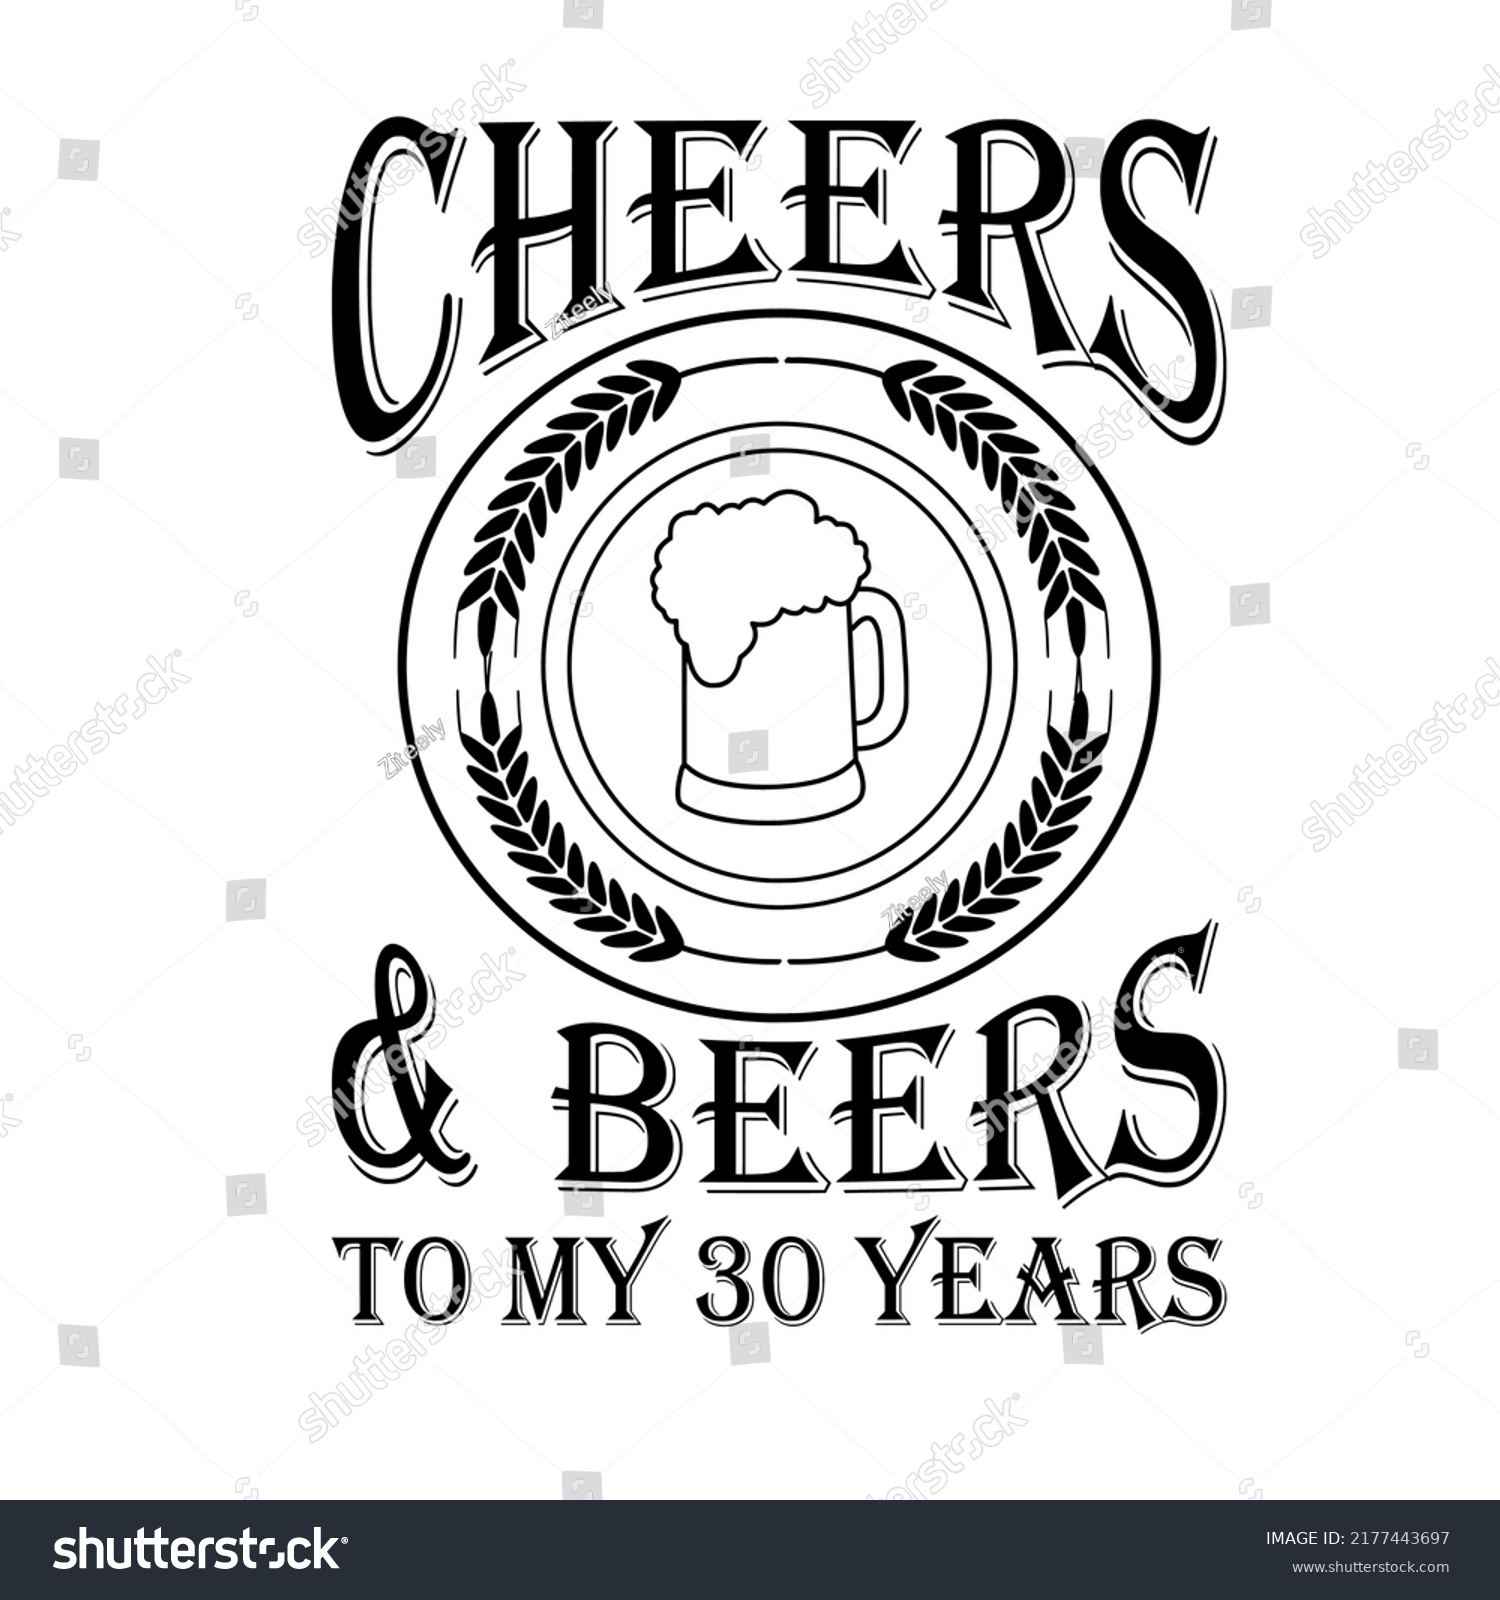 SVG of Cheers AND Beers to My 30 Years is a vector design for printing on various surfaces like t shirt, mug etc. svg